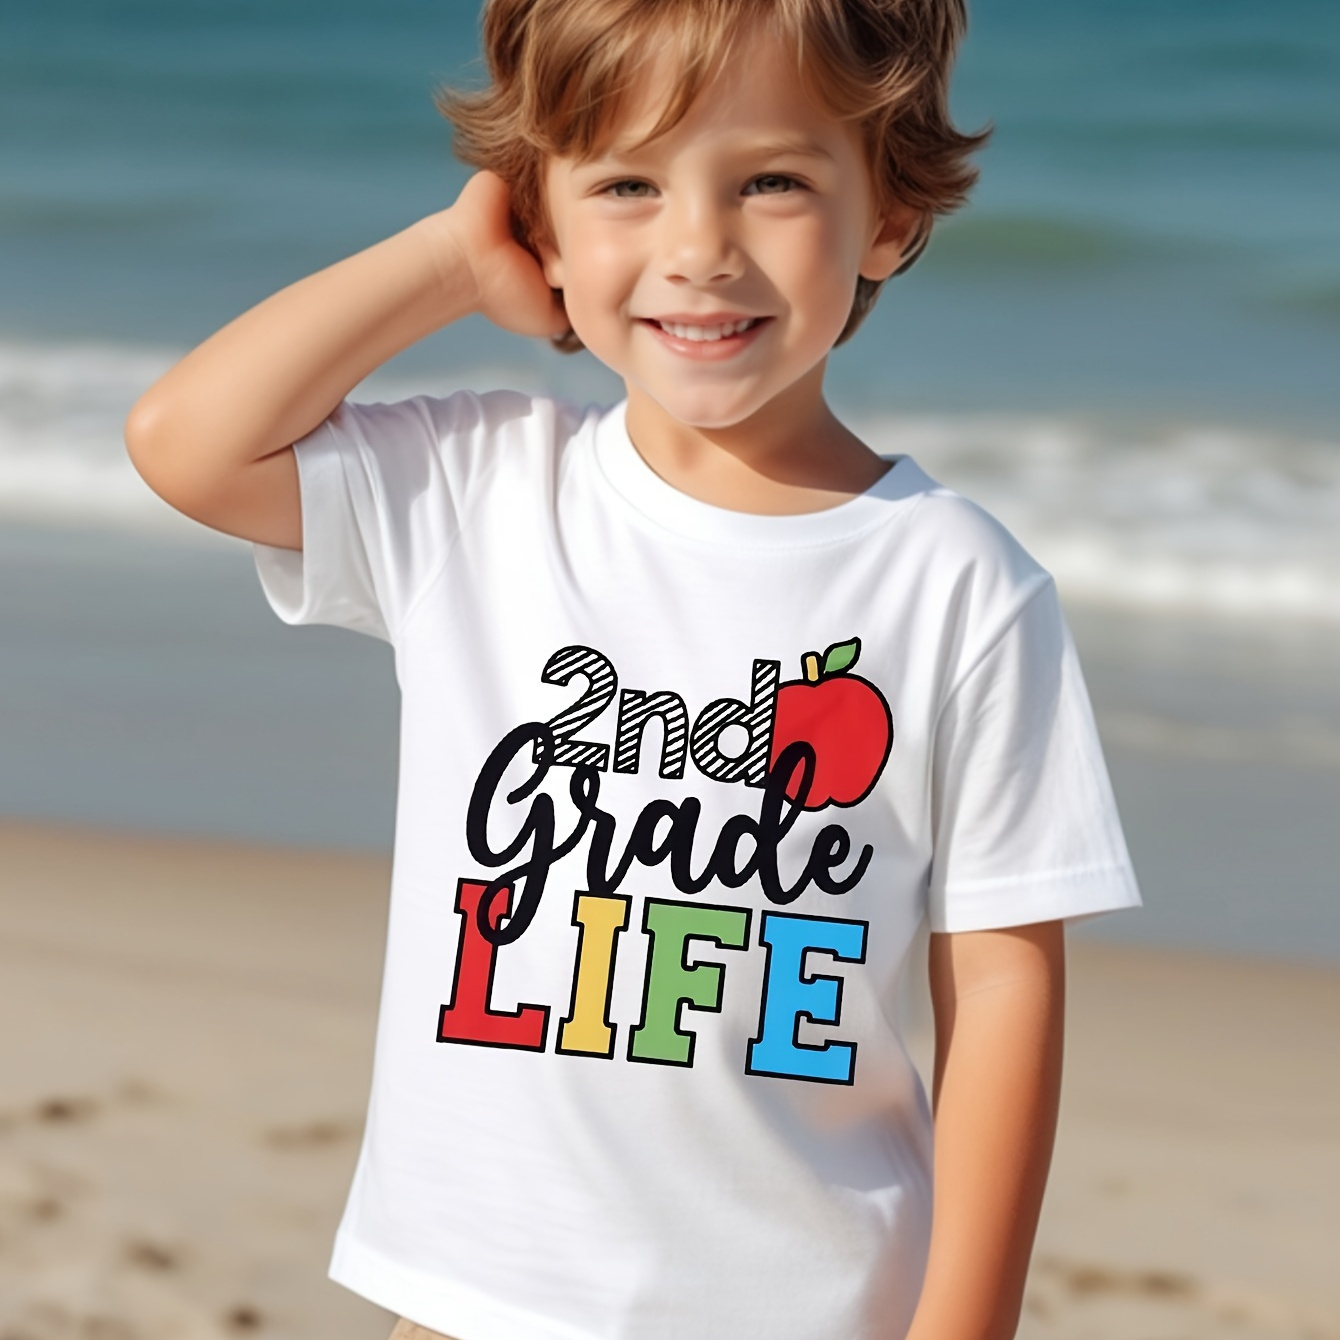 

2nd Grade Life" Cute Cartoon Print T-shirt- Engaging Visuals, Casual Short Sleeve T-shirts For Boys - Cool, Lightweight And Comfy Summer Clothes!